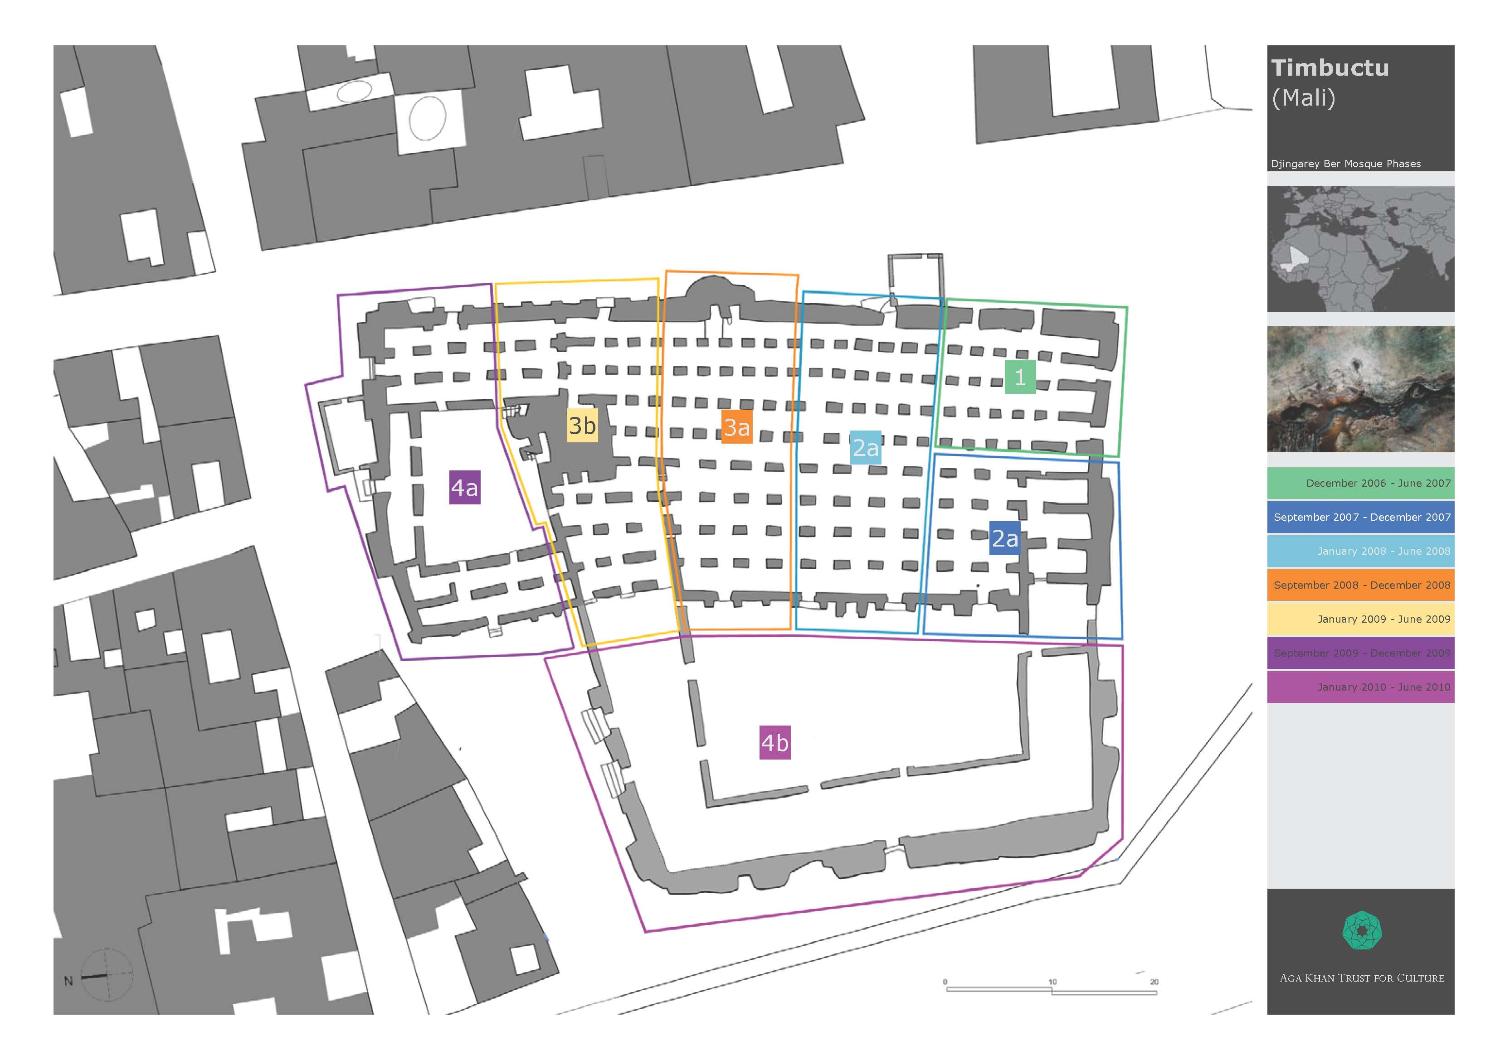 Plan of mosque restoration phases (2007-2010)